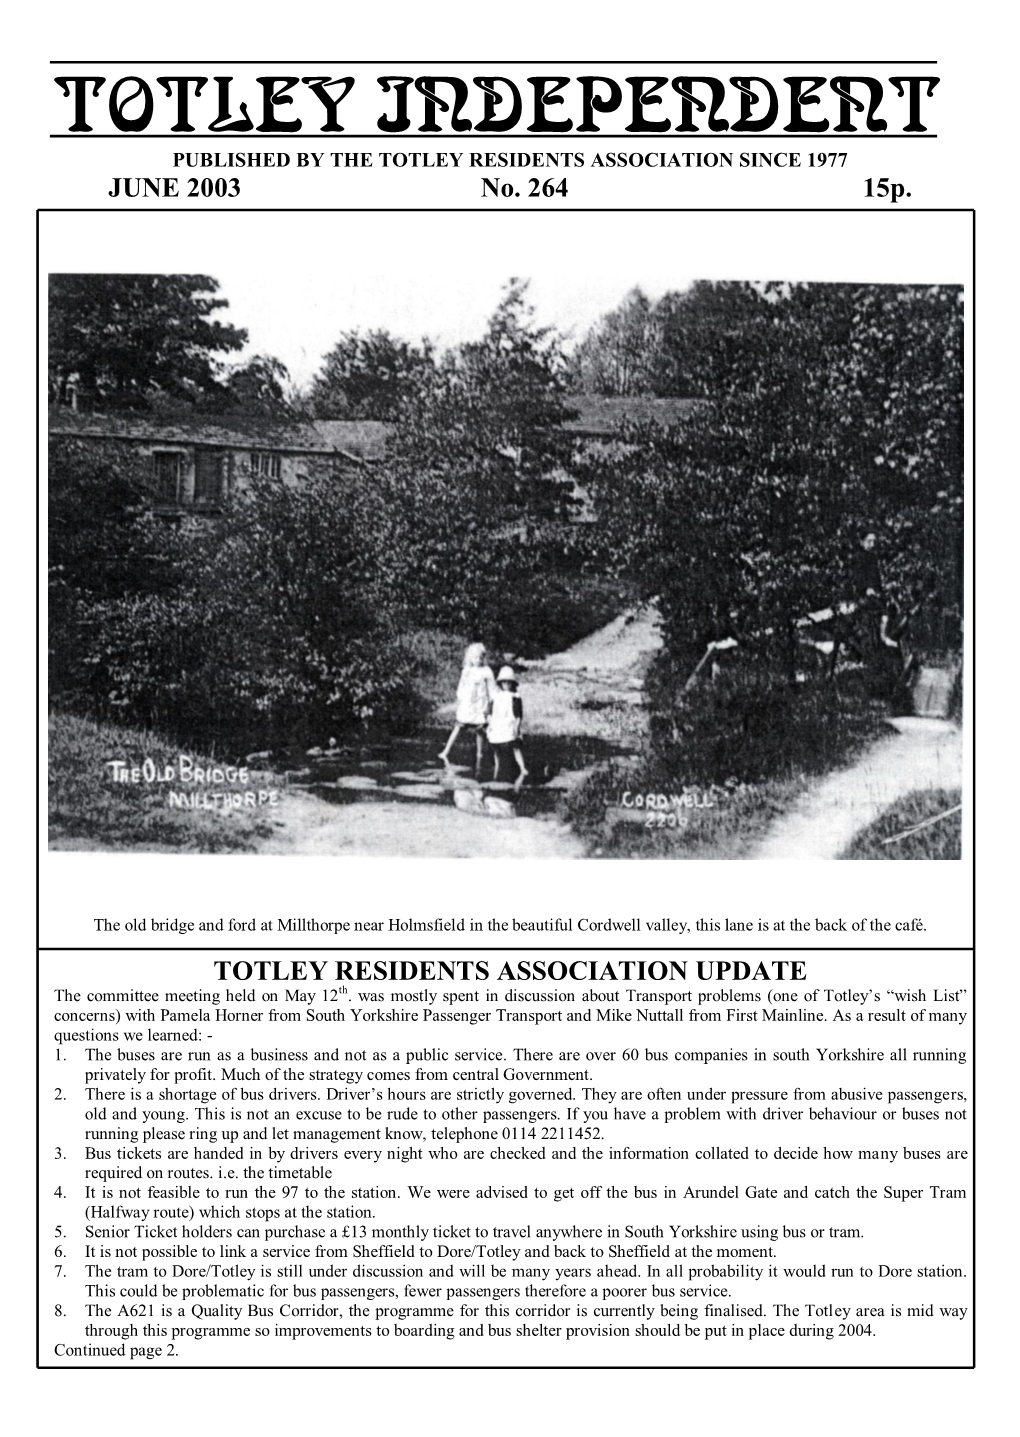 TOTLEY INDEPENDENT PUBLISHED by the TOTLEY RESIDENTS ASSOCIATION SINCE 1977 JUNE 2003 No